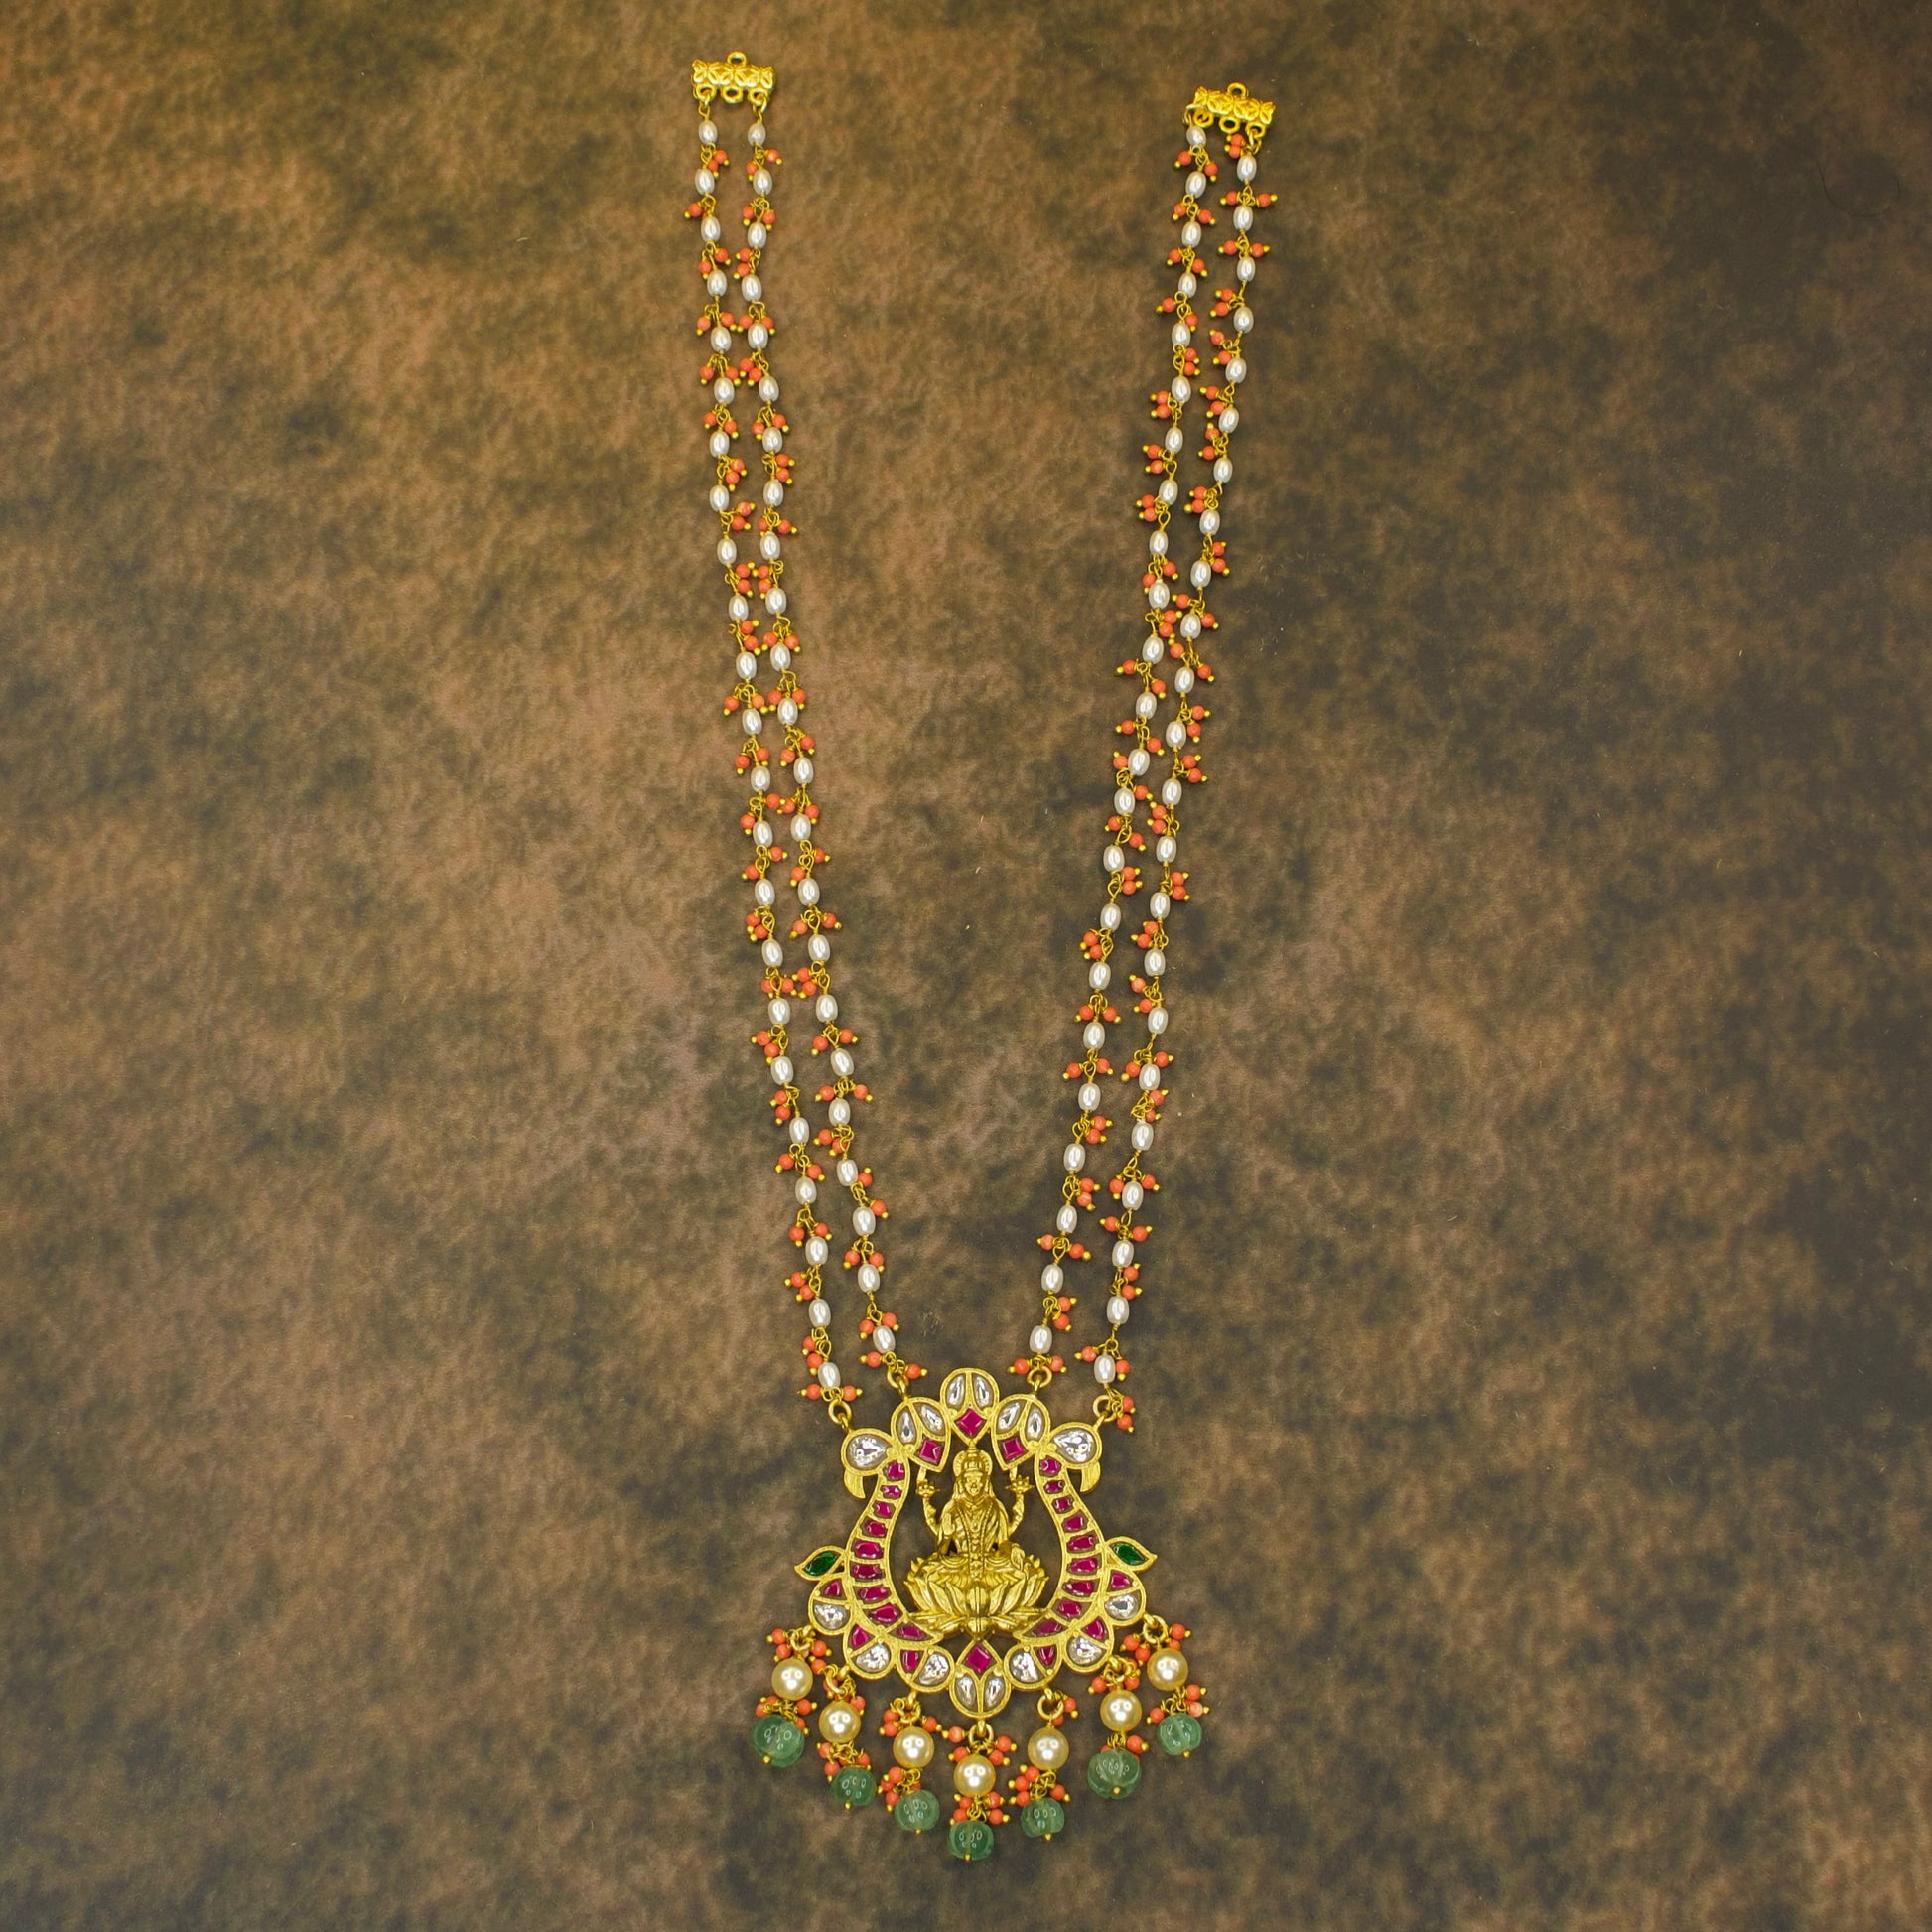 Elegant Laxmi Devi Jadau Kundan Pendant with coral beads. The necklace is studded with vibrant ruby and emerald gemstones. Apt for wedding, and other traditional ceremonies.